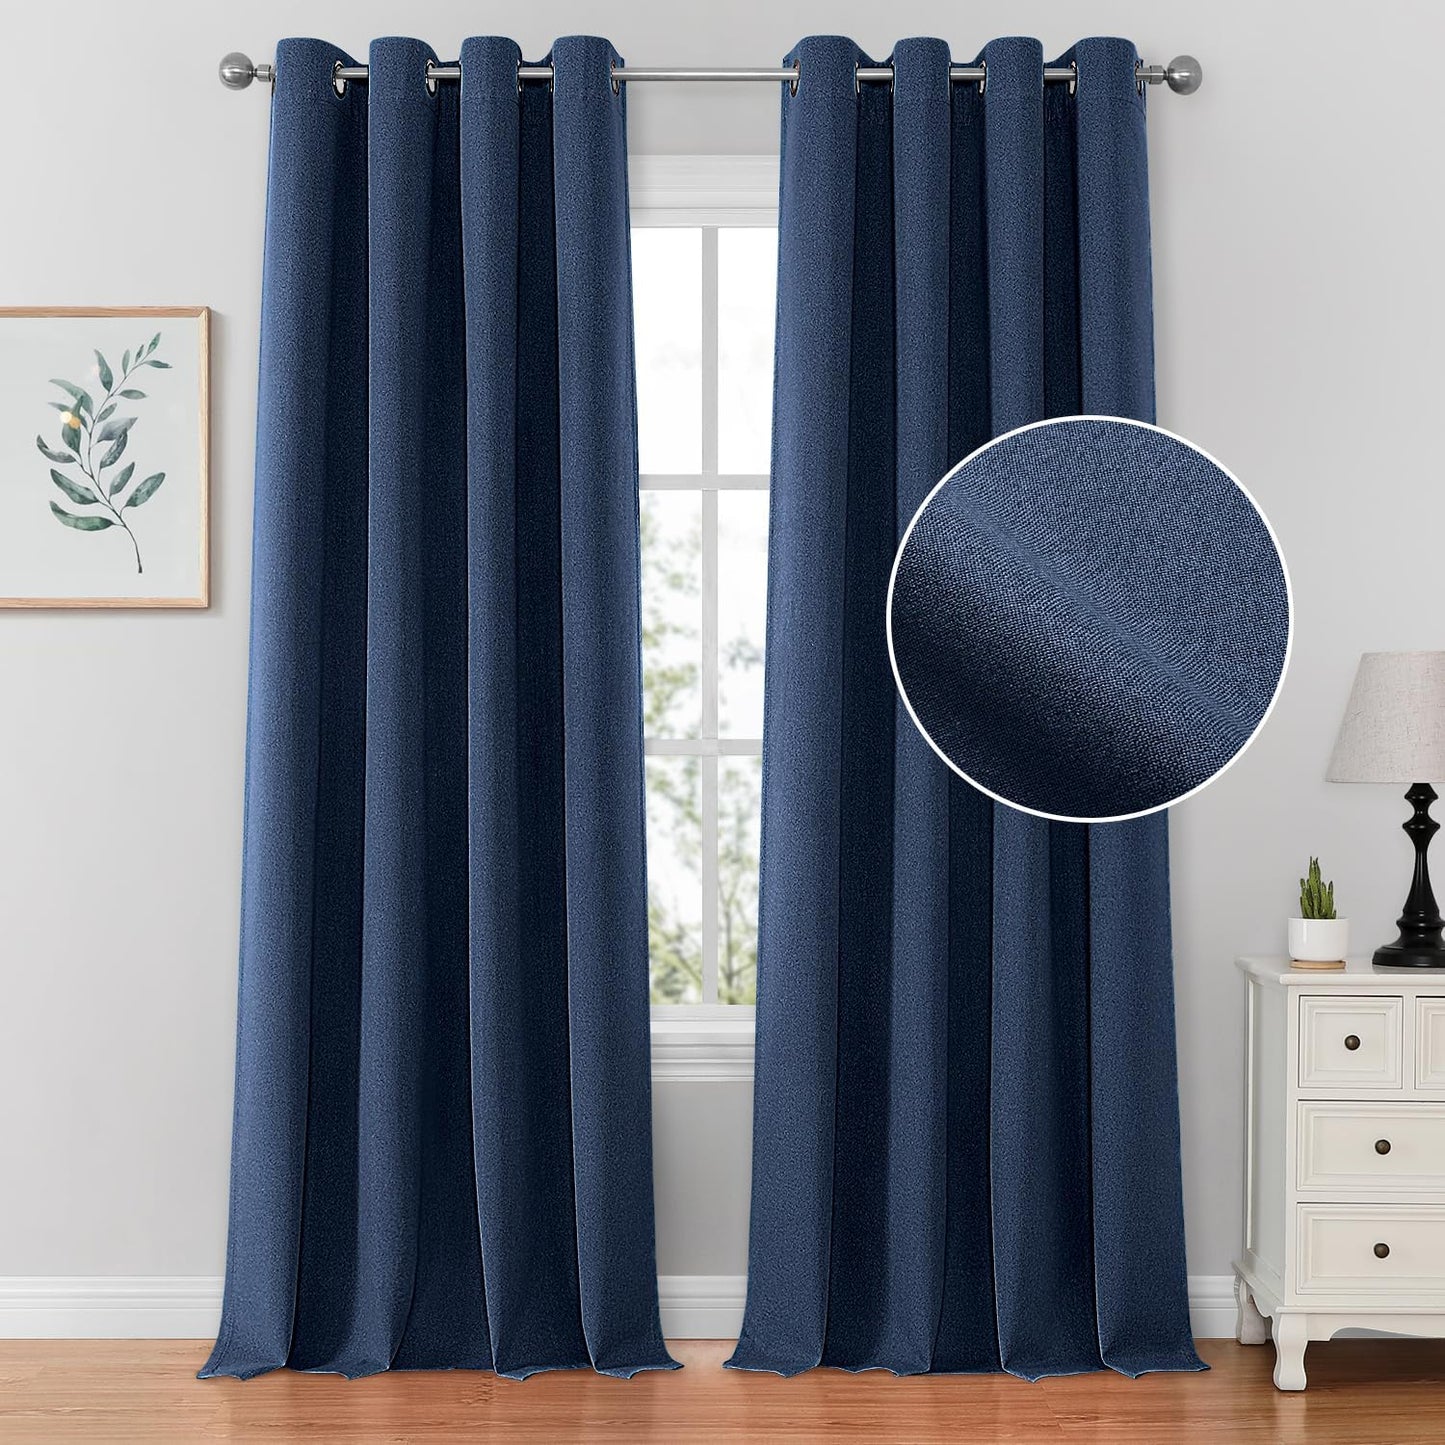 HOMEIDEAS 100% Blush Pink Linen Blackout Curtains for Bedroom, 52 X 84 Inch Room Darkening Curtains for Living, Faux Linen Thermal Insulated Full Black Out Grommet Window Curtains/Drapes  HOMEIDEAS Navy Blue W52" X L84" 